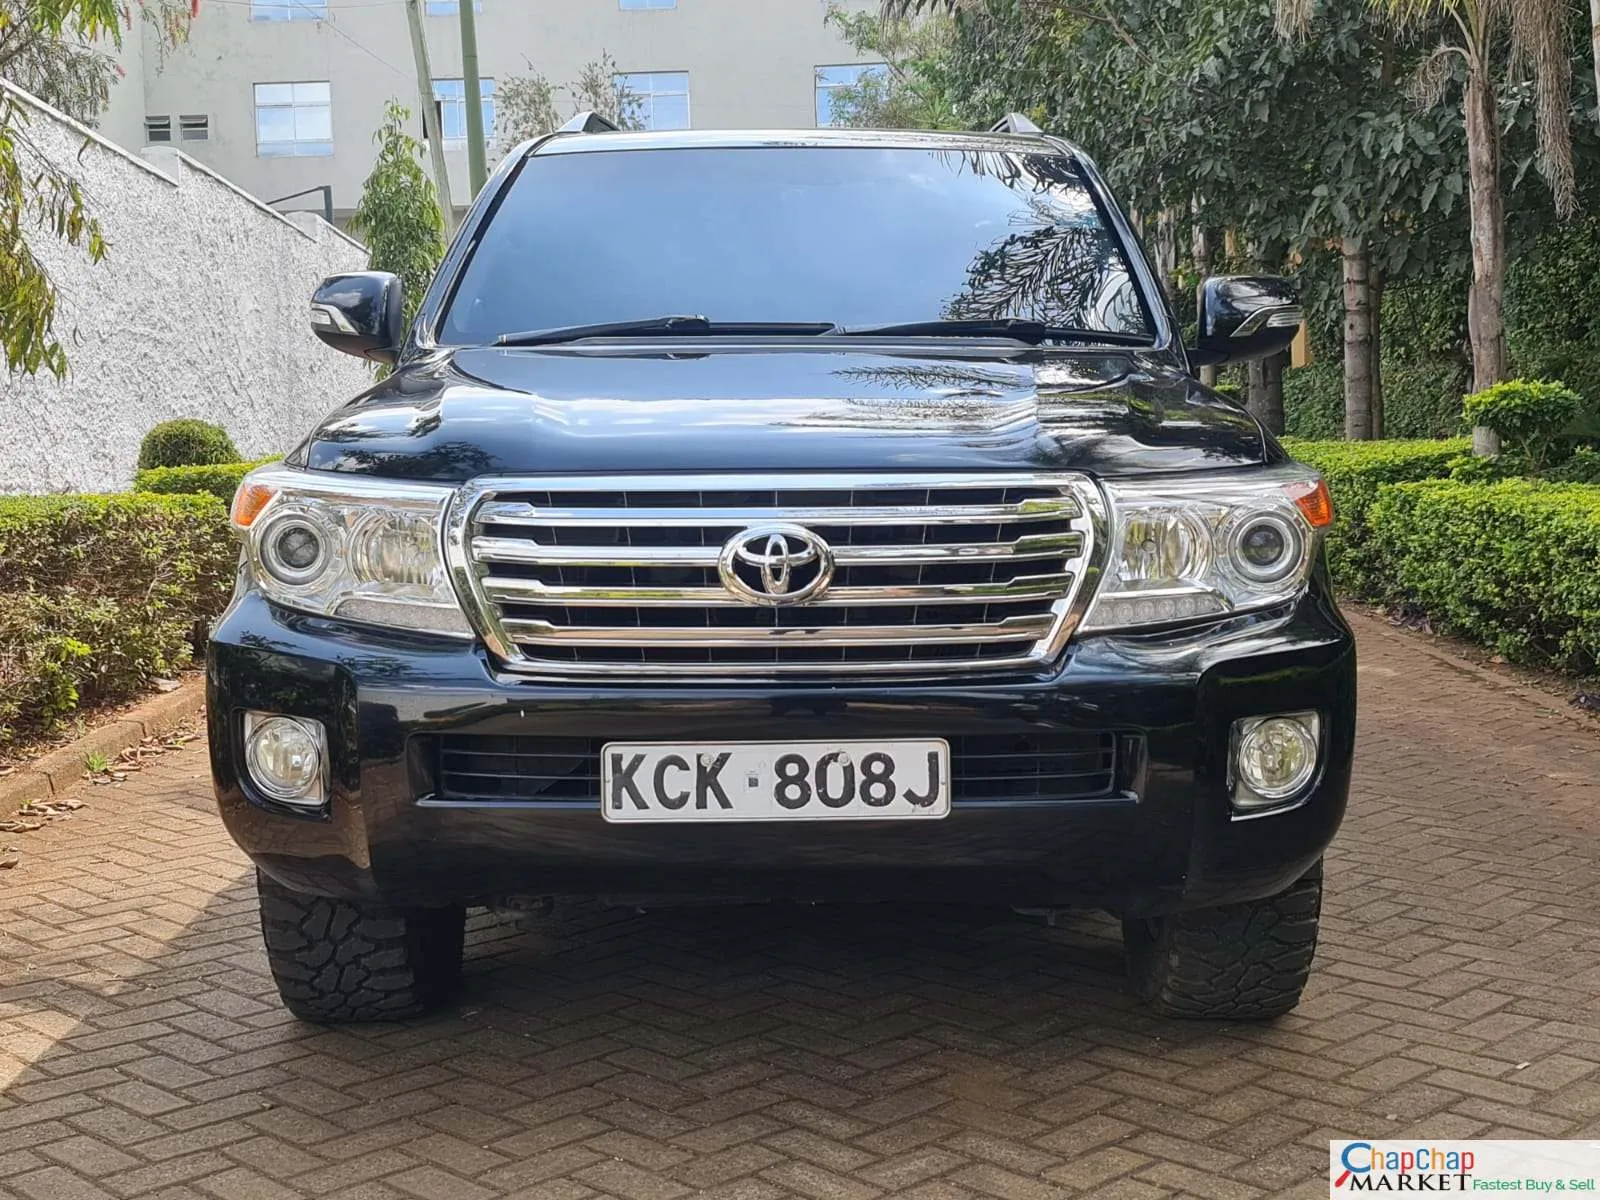 Toyota Land cruiser V8 DIESEL 200 series SUNROOF TRADE IN OK EXCLUSIVE v8 for Sale in Kenya Hire purchase installments EXCLUSIVE